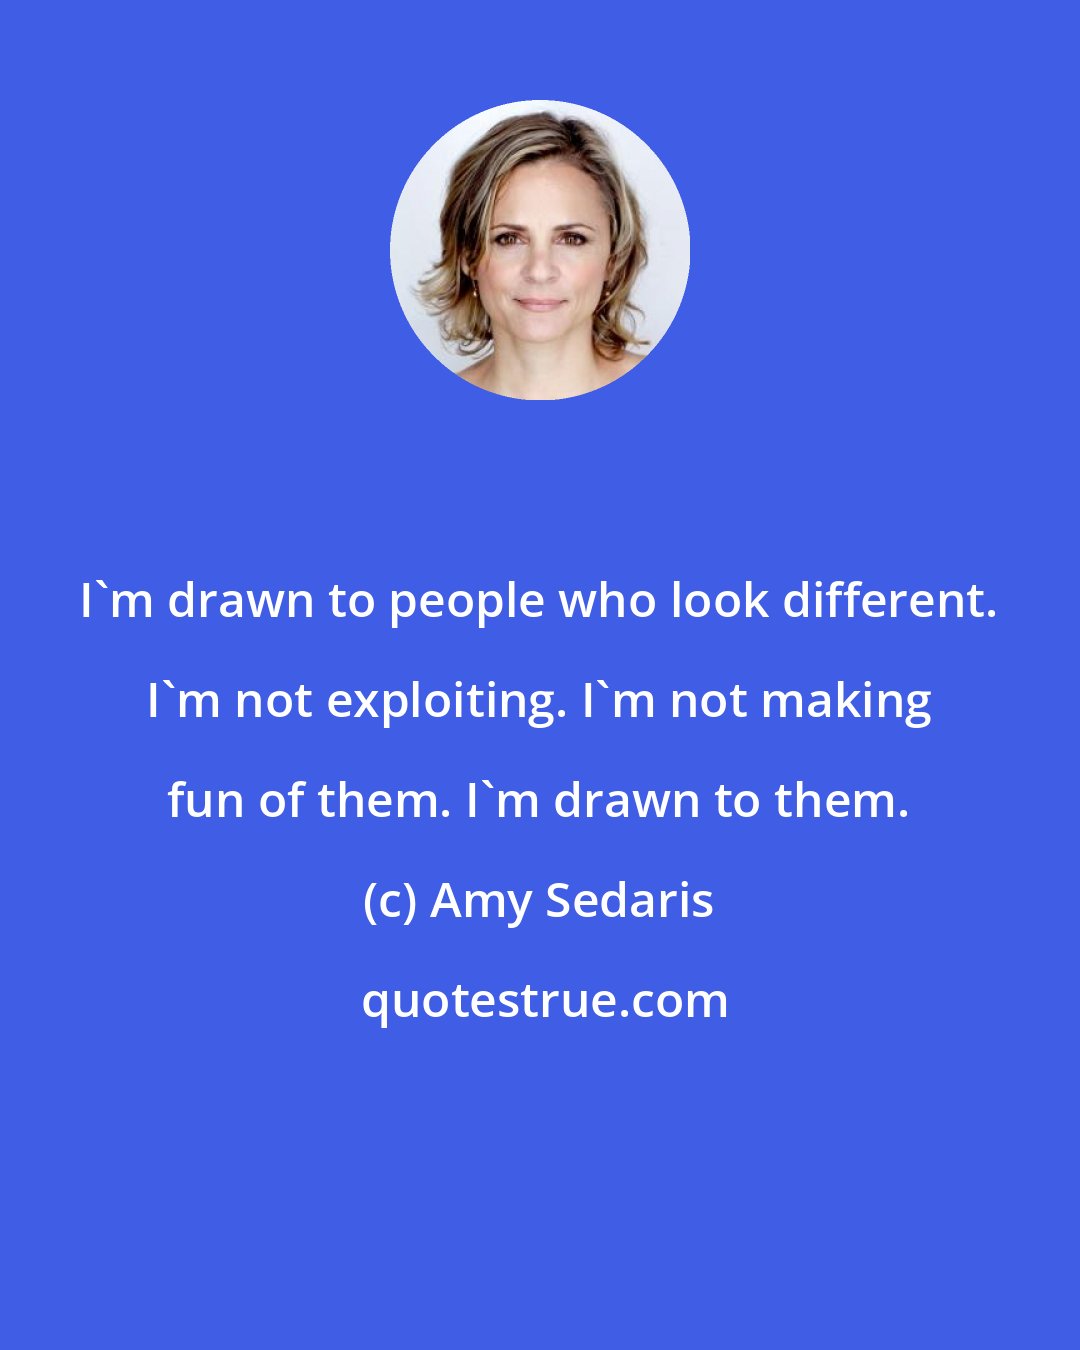 Amy Sedaris: I'm drawn to people who look different. I'm not exploiting. I'm not making fun of them. I'm drawn to them.